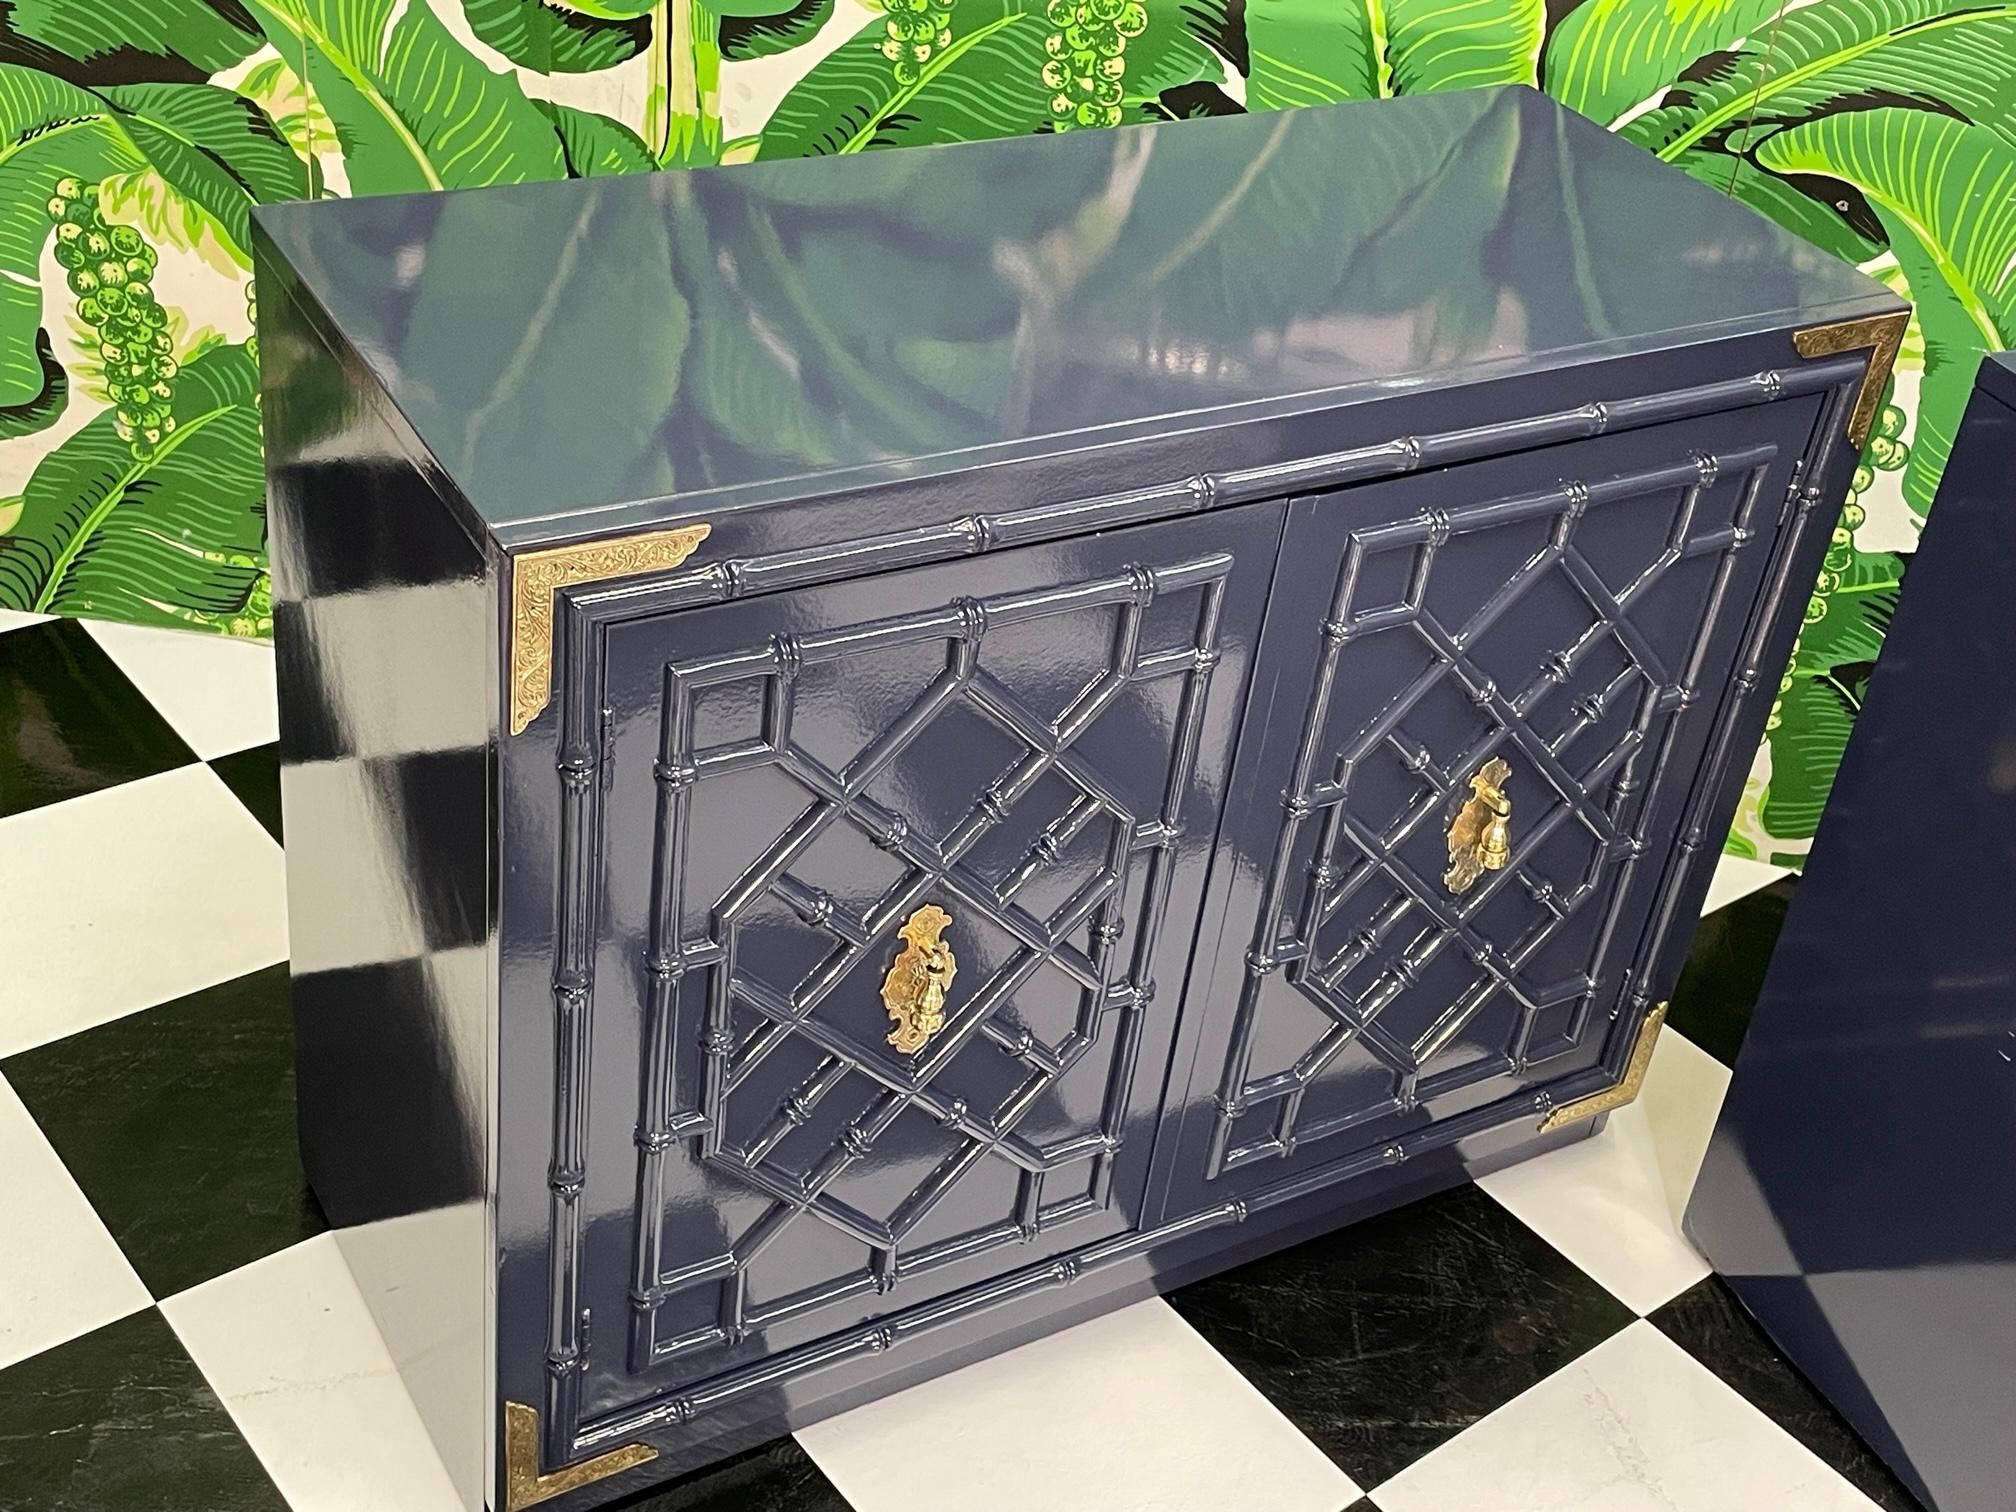 Faux bamboo cabinets feature brass hardware and detailing and a high gloss lacquer. Doors reveal storage space with large drawer. Good condition with minor imperfections to the newly lacquered finish, see photos for condition details.
For a shipping